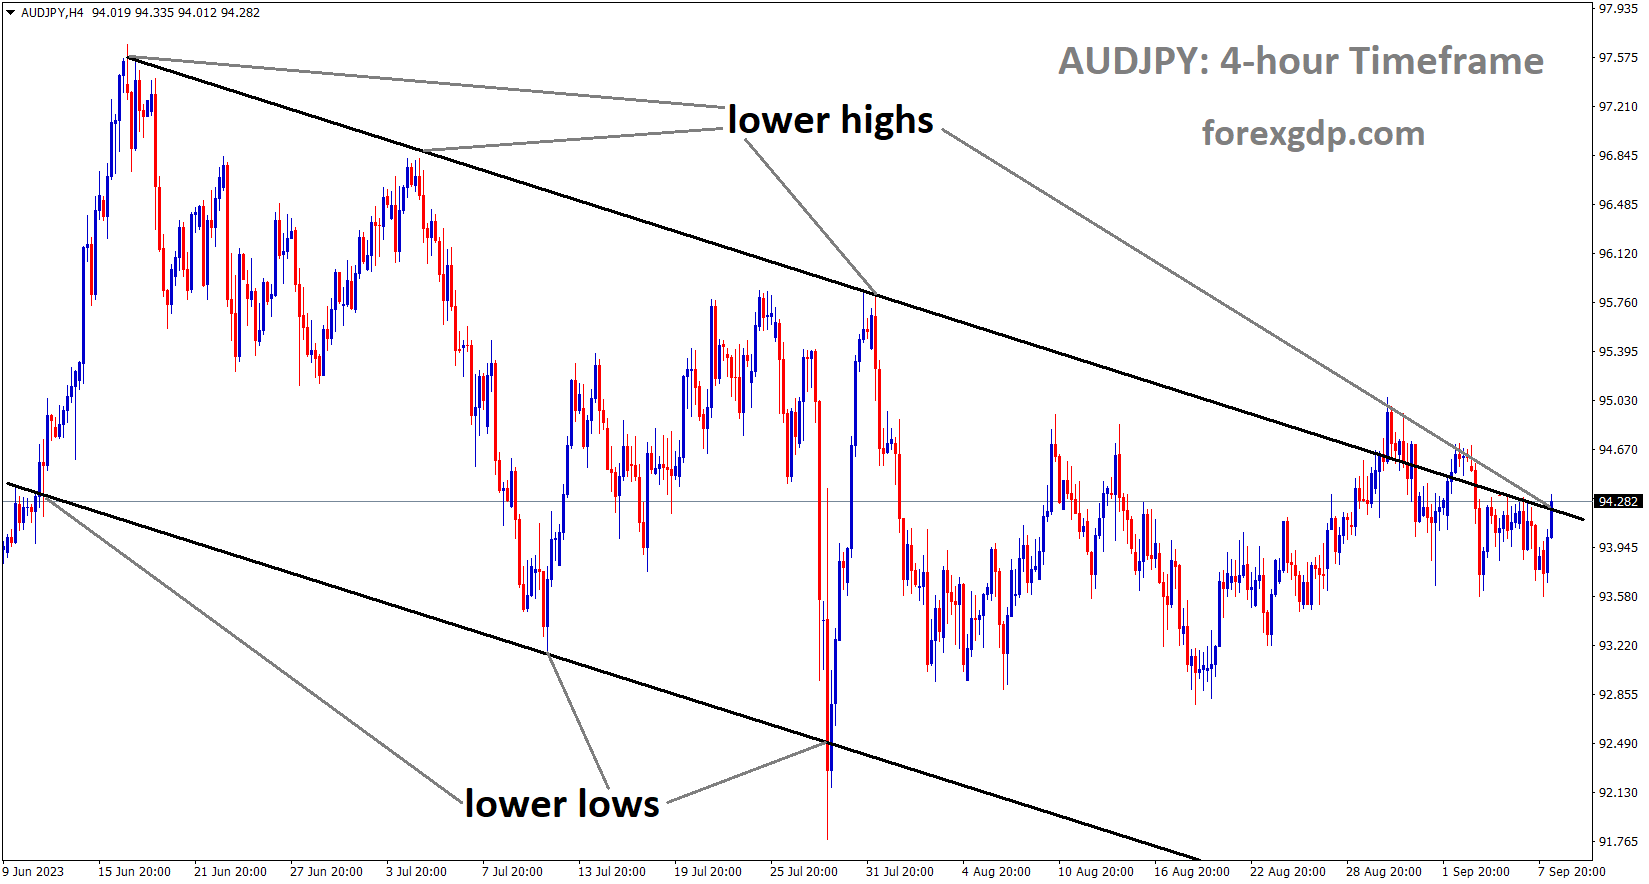 AUDJPY is moving in the Descending channel and the market has reached the lower high area of the channel